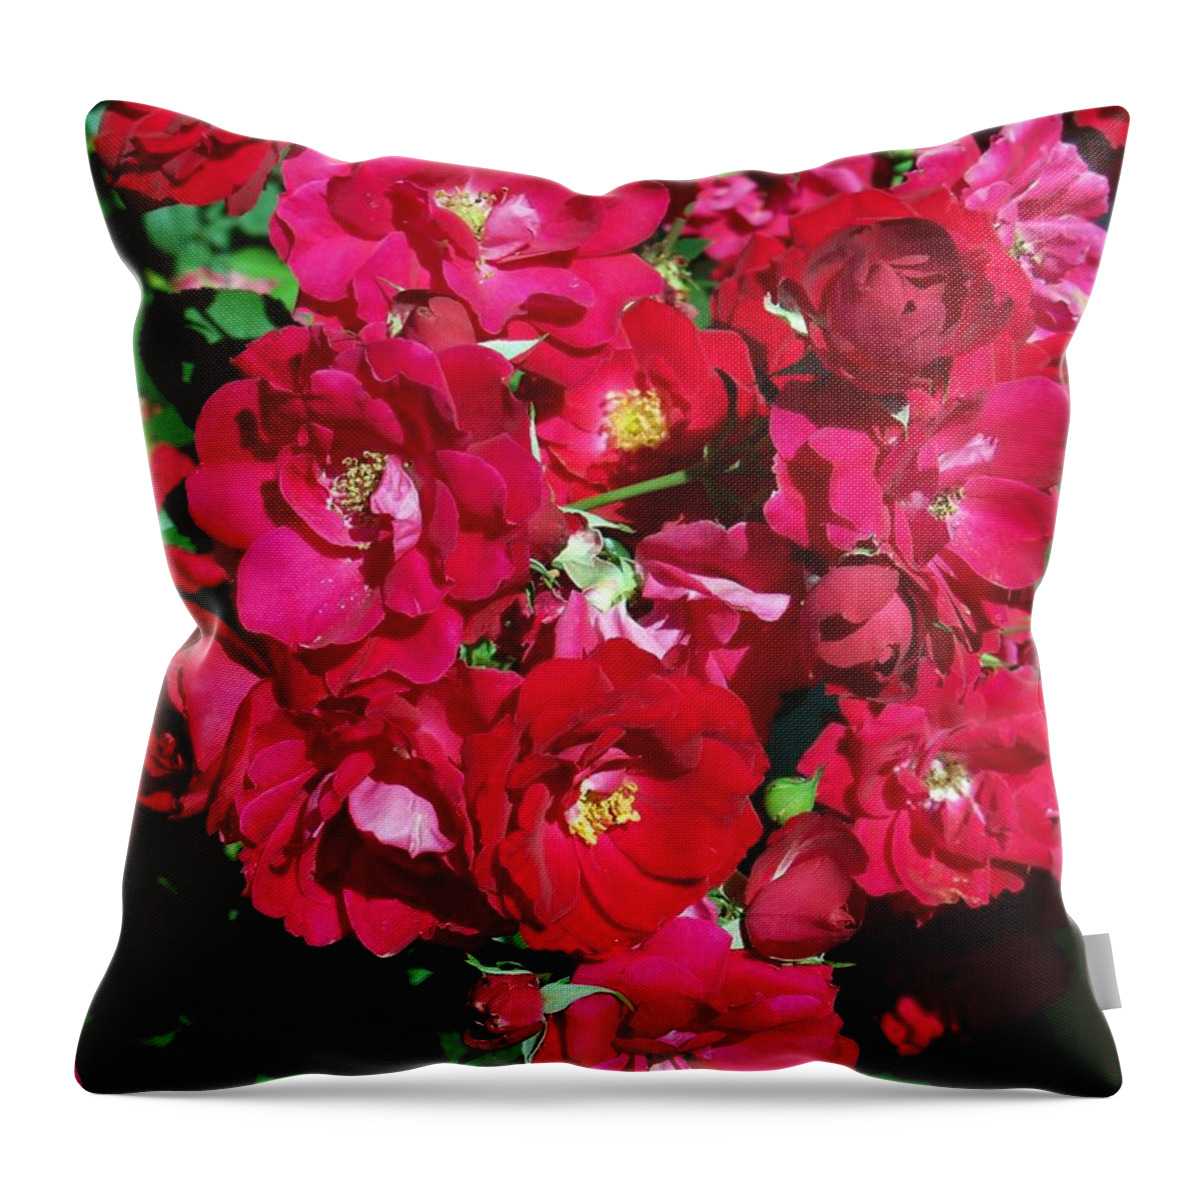 Rose Throw Pillow featuring the photograph Red Rose Bush by Corinne Elizabeth Cowherd